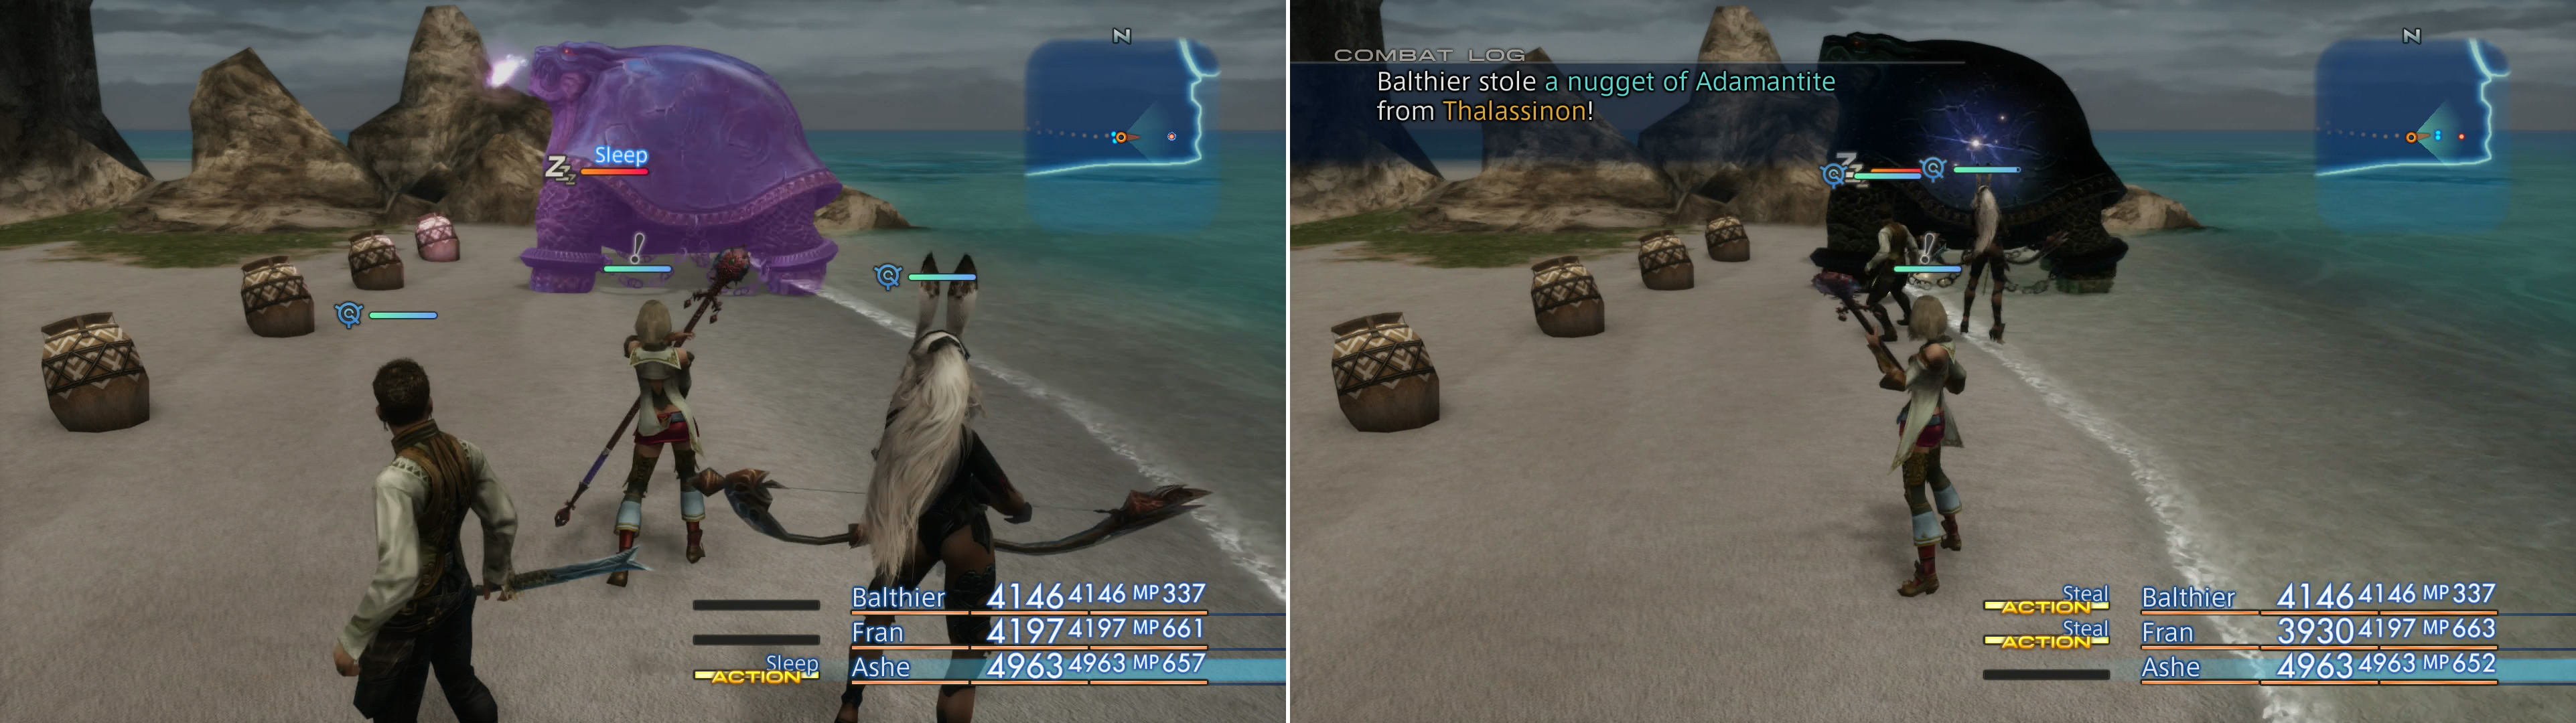 Start the fight out by putting Thalassinon to sleep (left), after which you can steal Adamantite from it at your leisure (right).